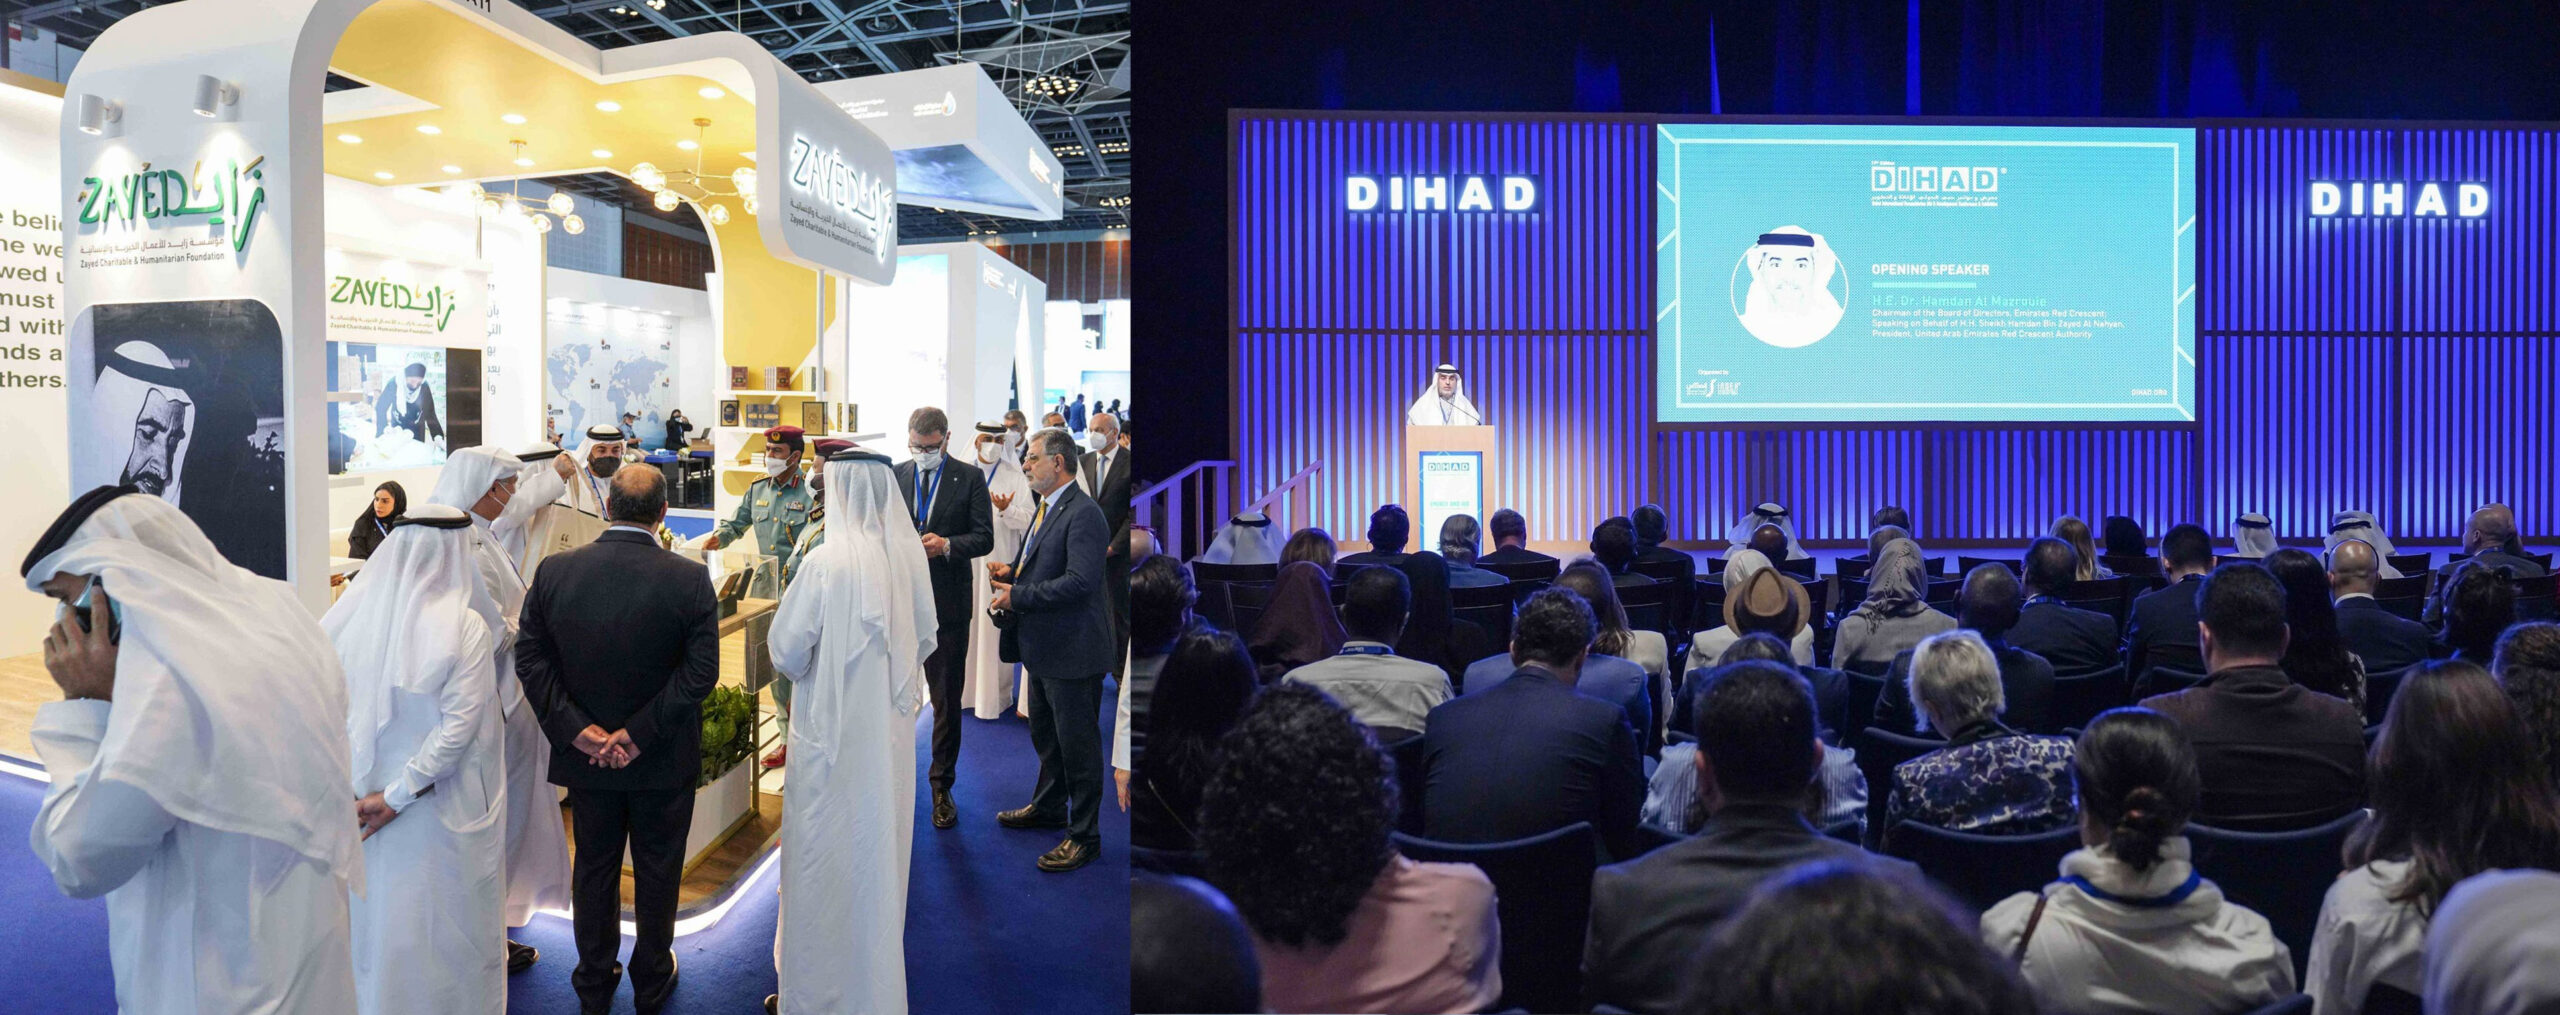 DIHAD: A Humanitarian Bussiness Event